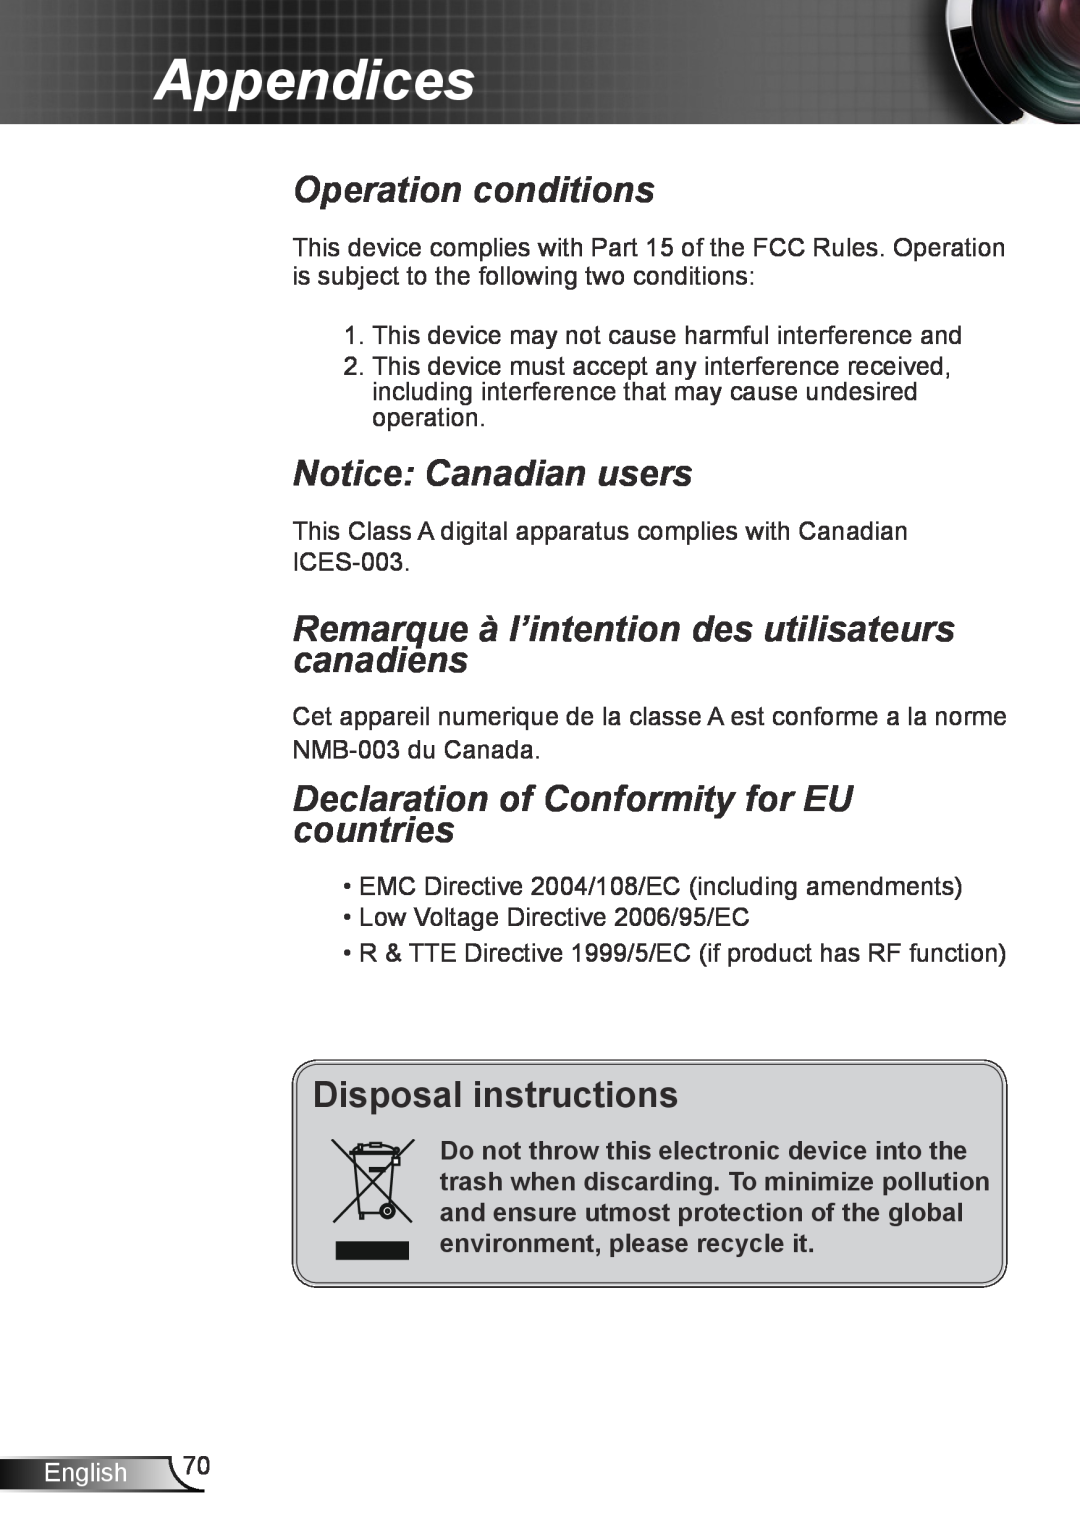 Optoma Technology TH7500NL Operation conditions, Notice Canadian users, Remarque à l’intention des utilisateurs canadiens 